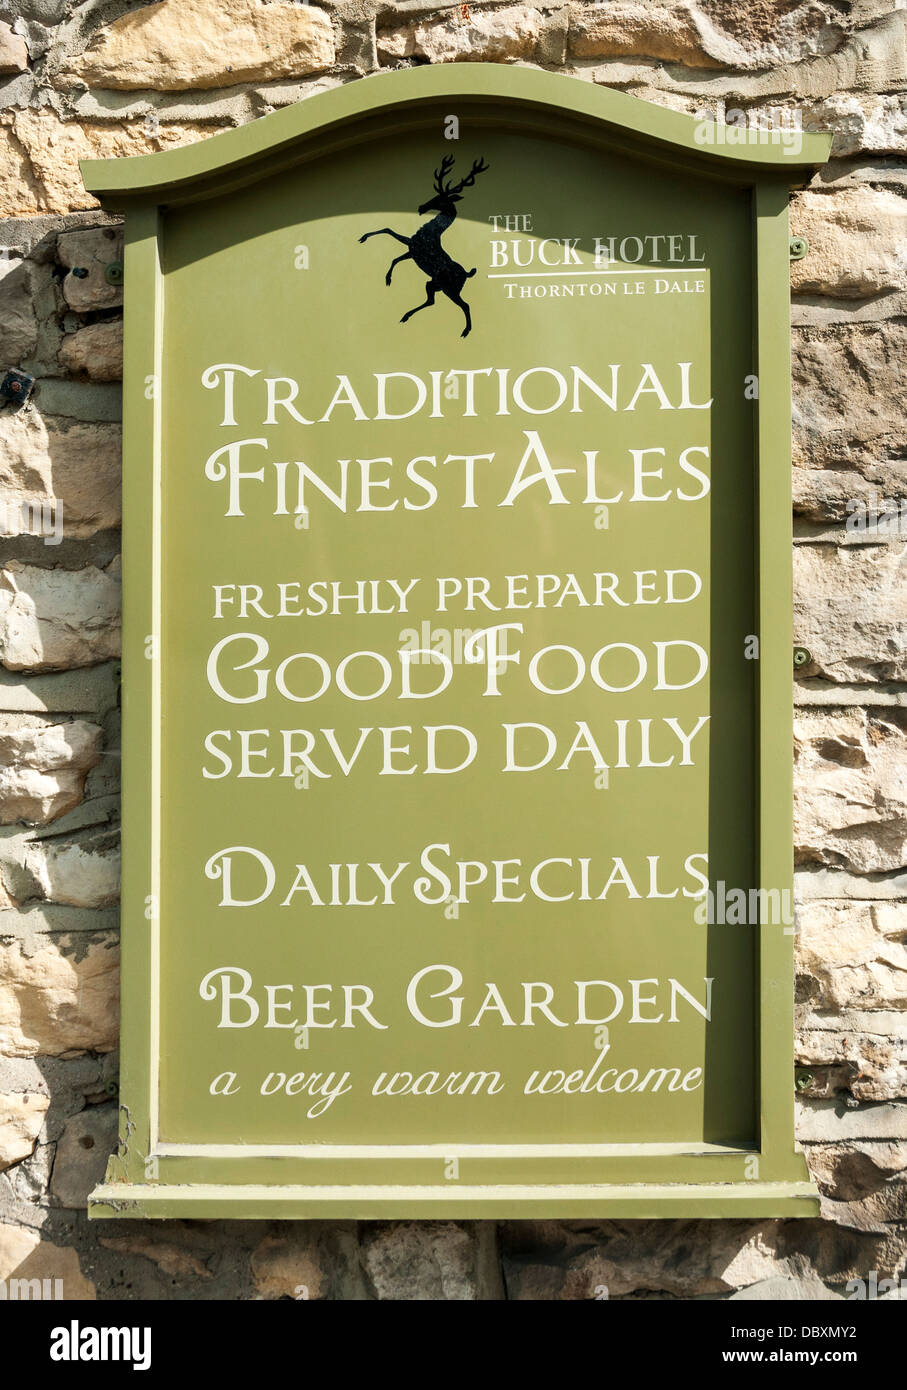 Great Britain, England, North Yorkshire, Thornton-le-Dale, The Buck Hotel, pub restaurant sign Stock Photo